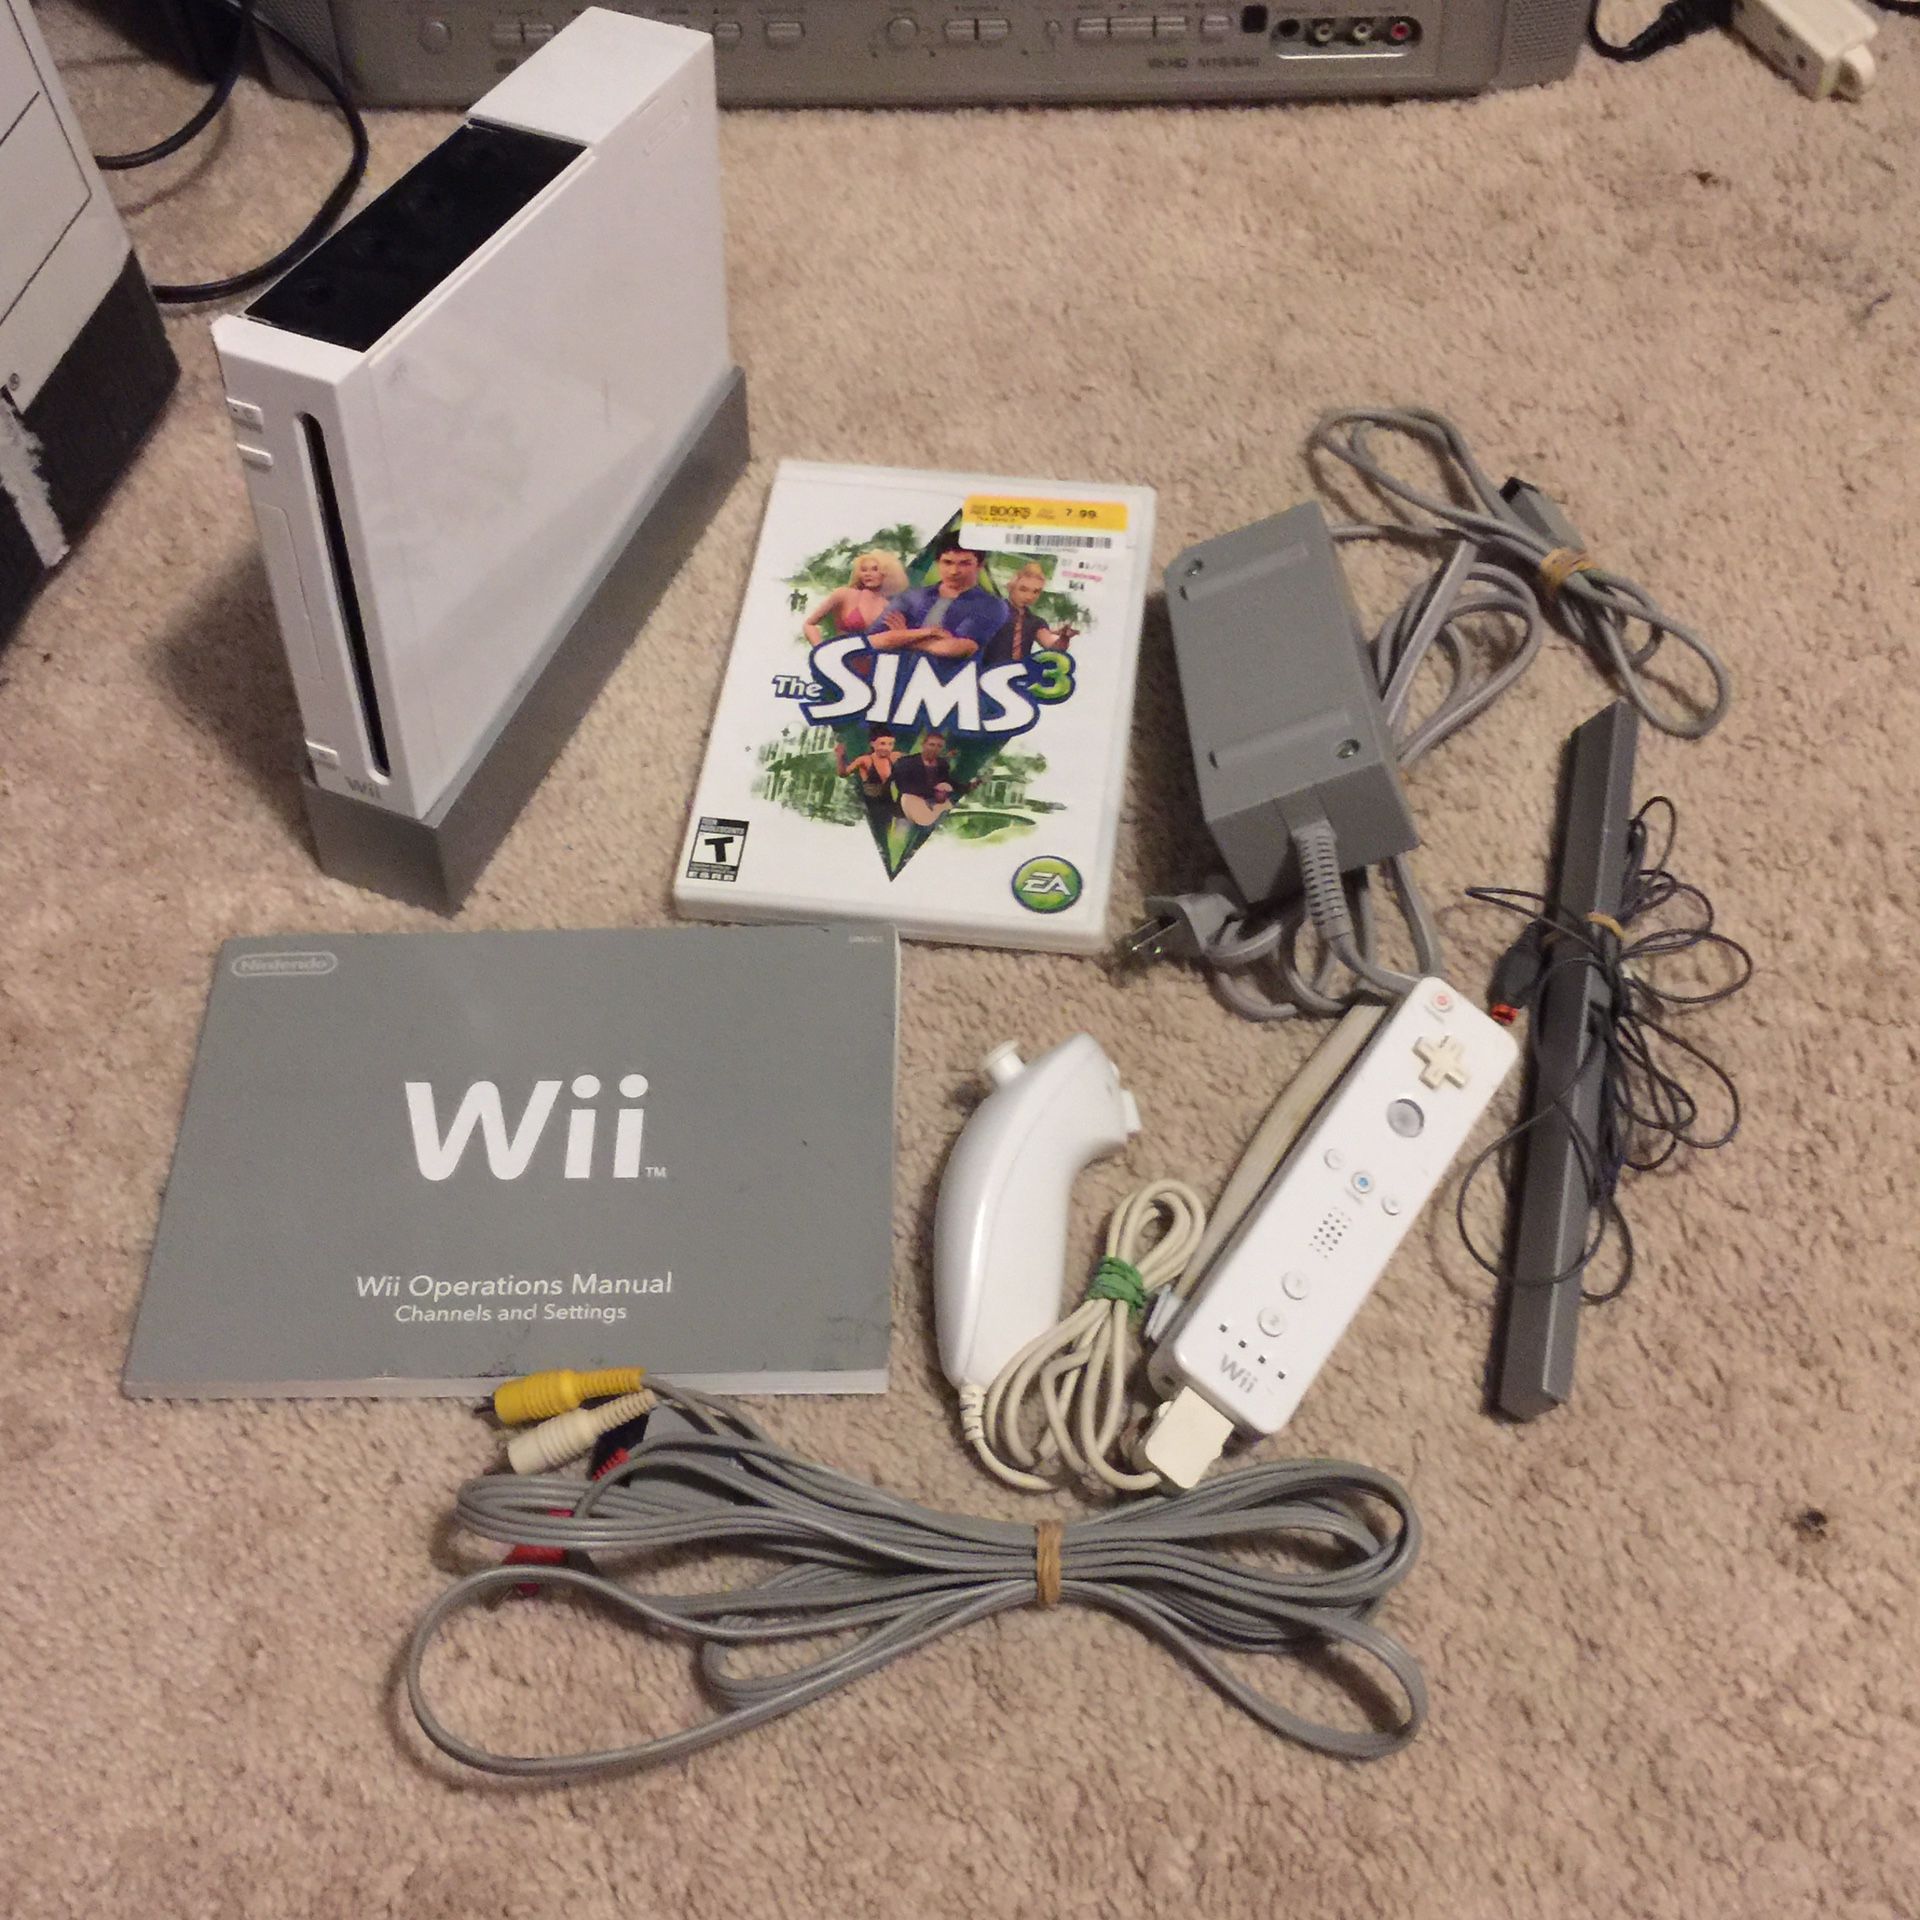 Wii With The Sims 3